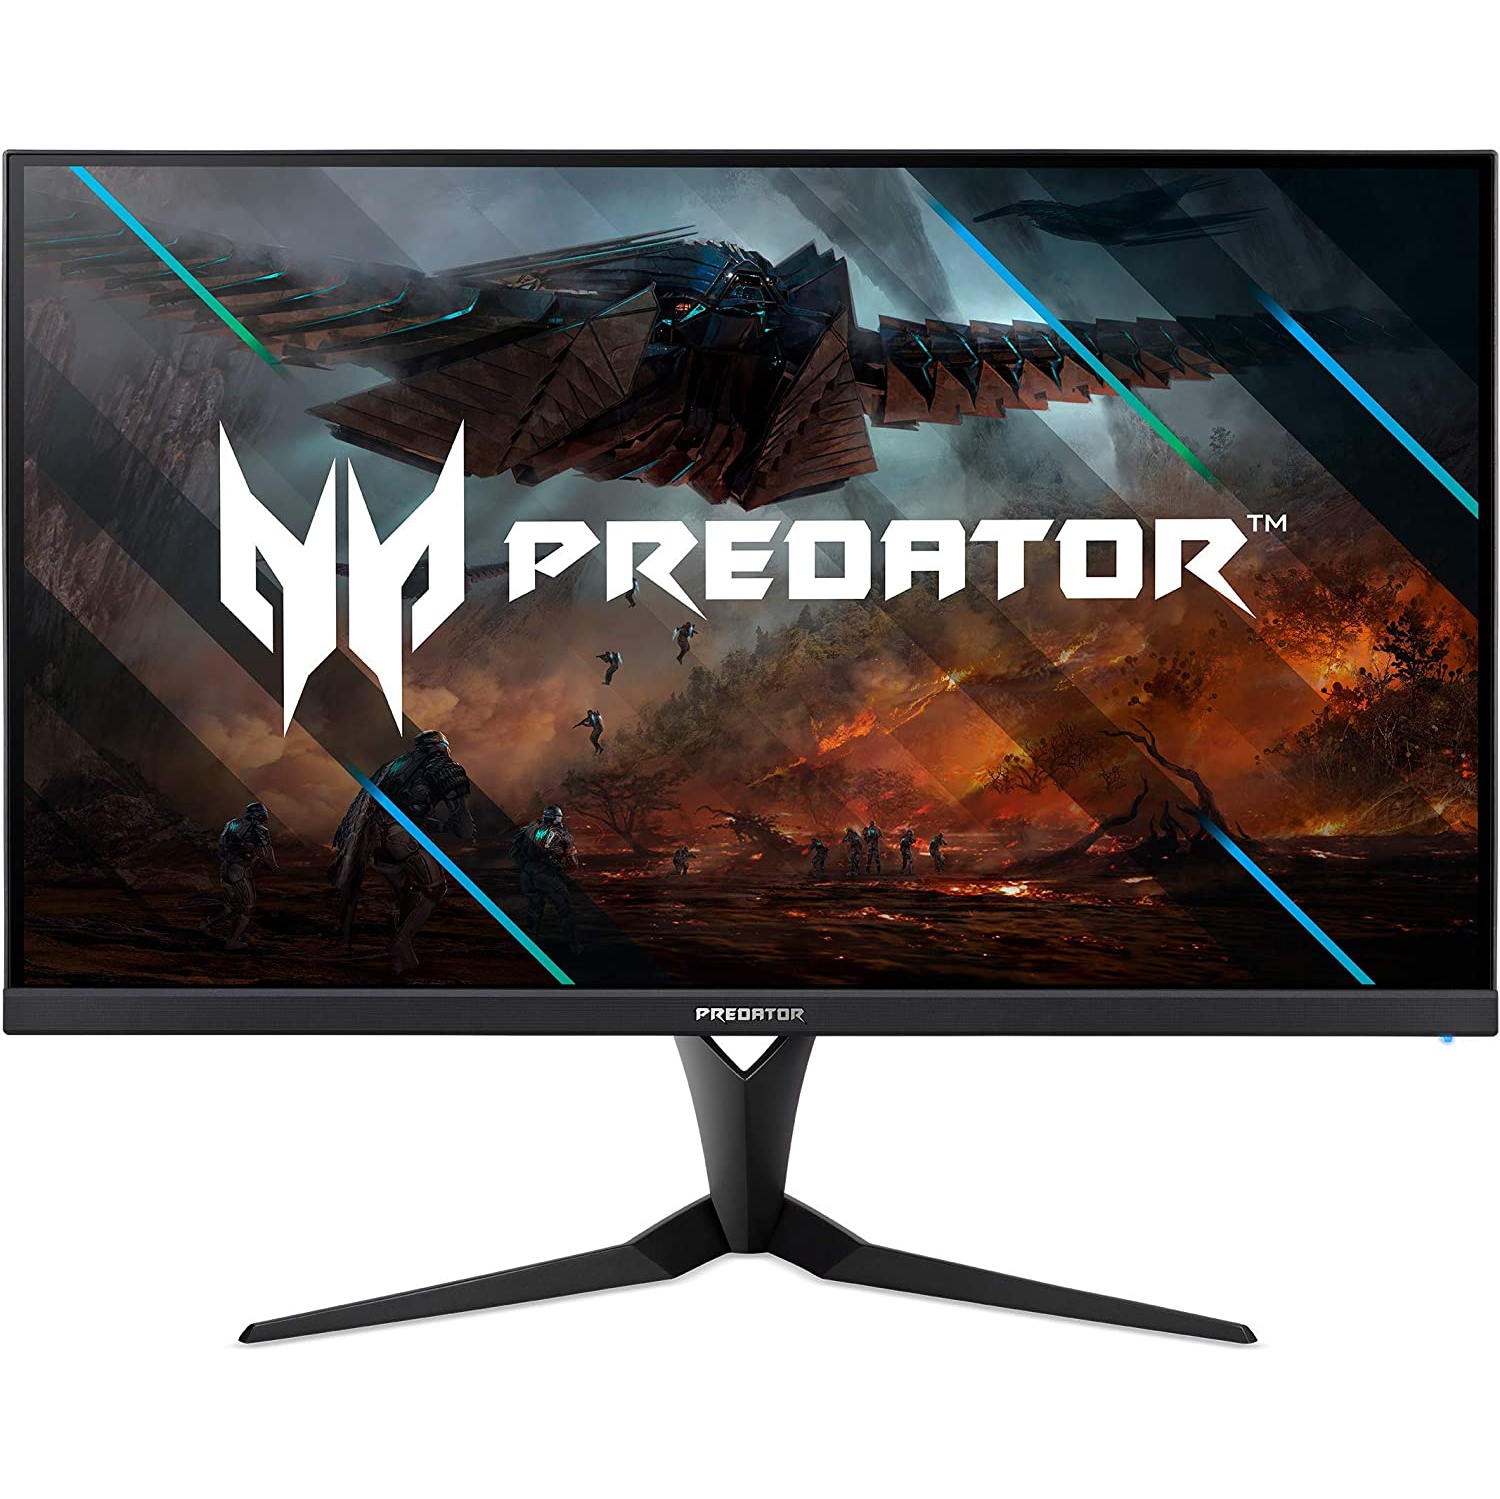 Acer Predator XB323U GXbmiiphzx 32" WQHD (2560 x 1440) IPS Gaming Monitor ,NVIDIA G-SYNC ,Certified DisplayHDR600 ,Up to 0.5ms ,Up to 270Hz ,1 x Display Port, 2 x HDMI and USB3.0